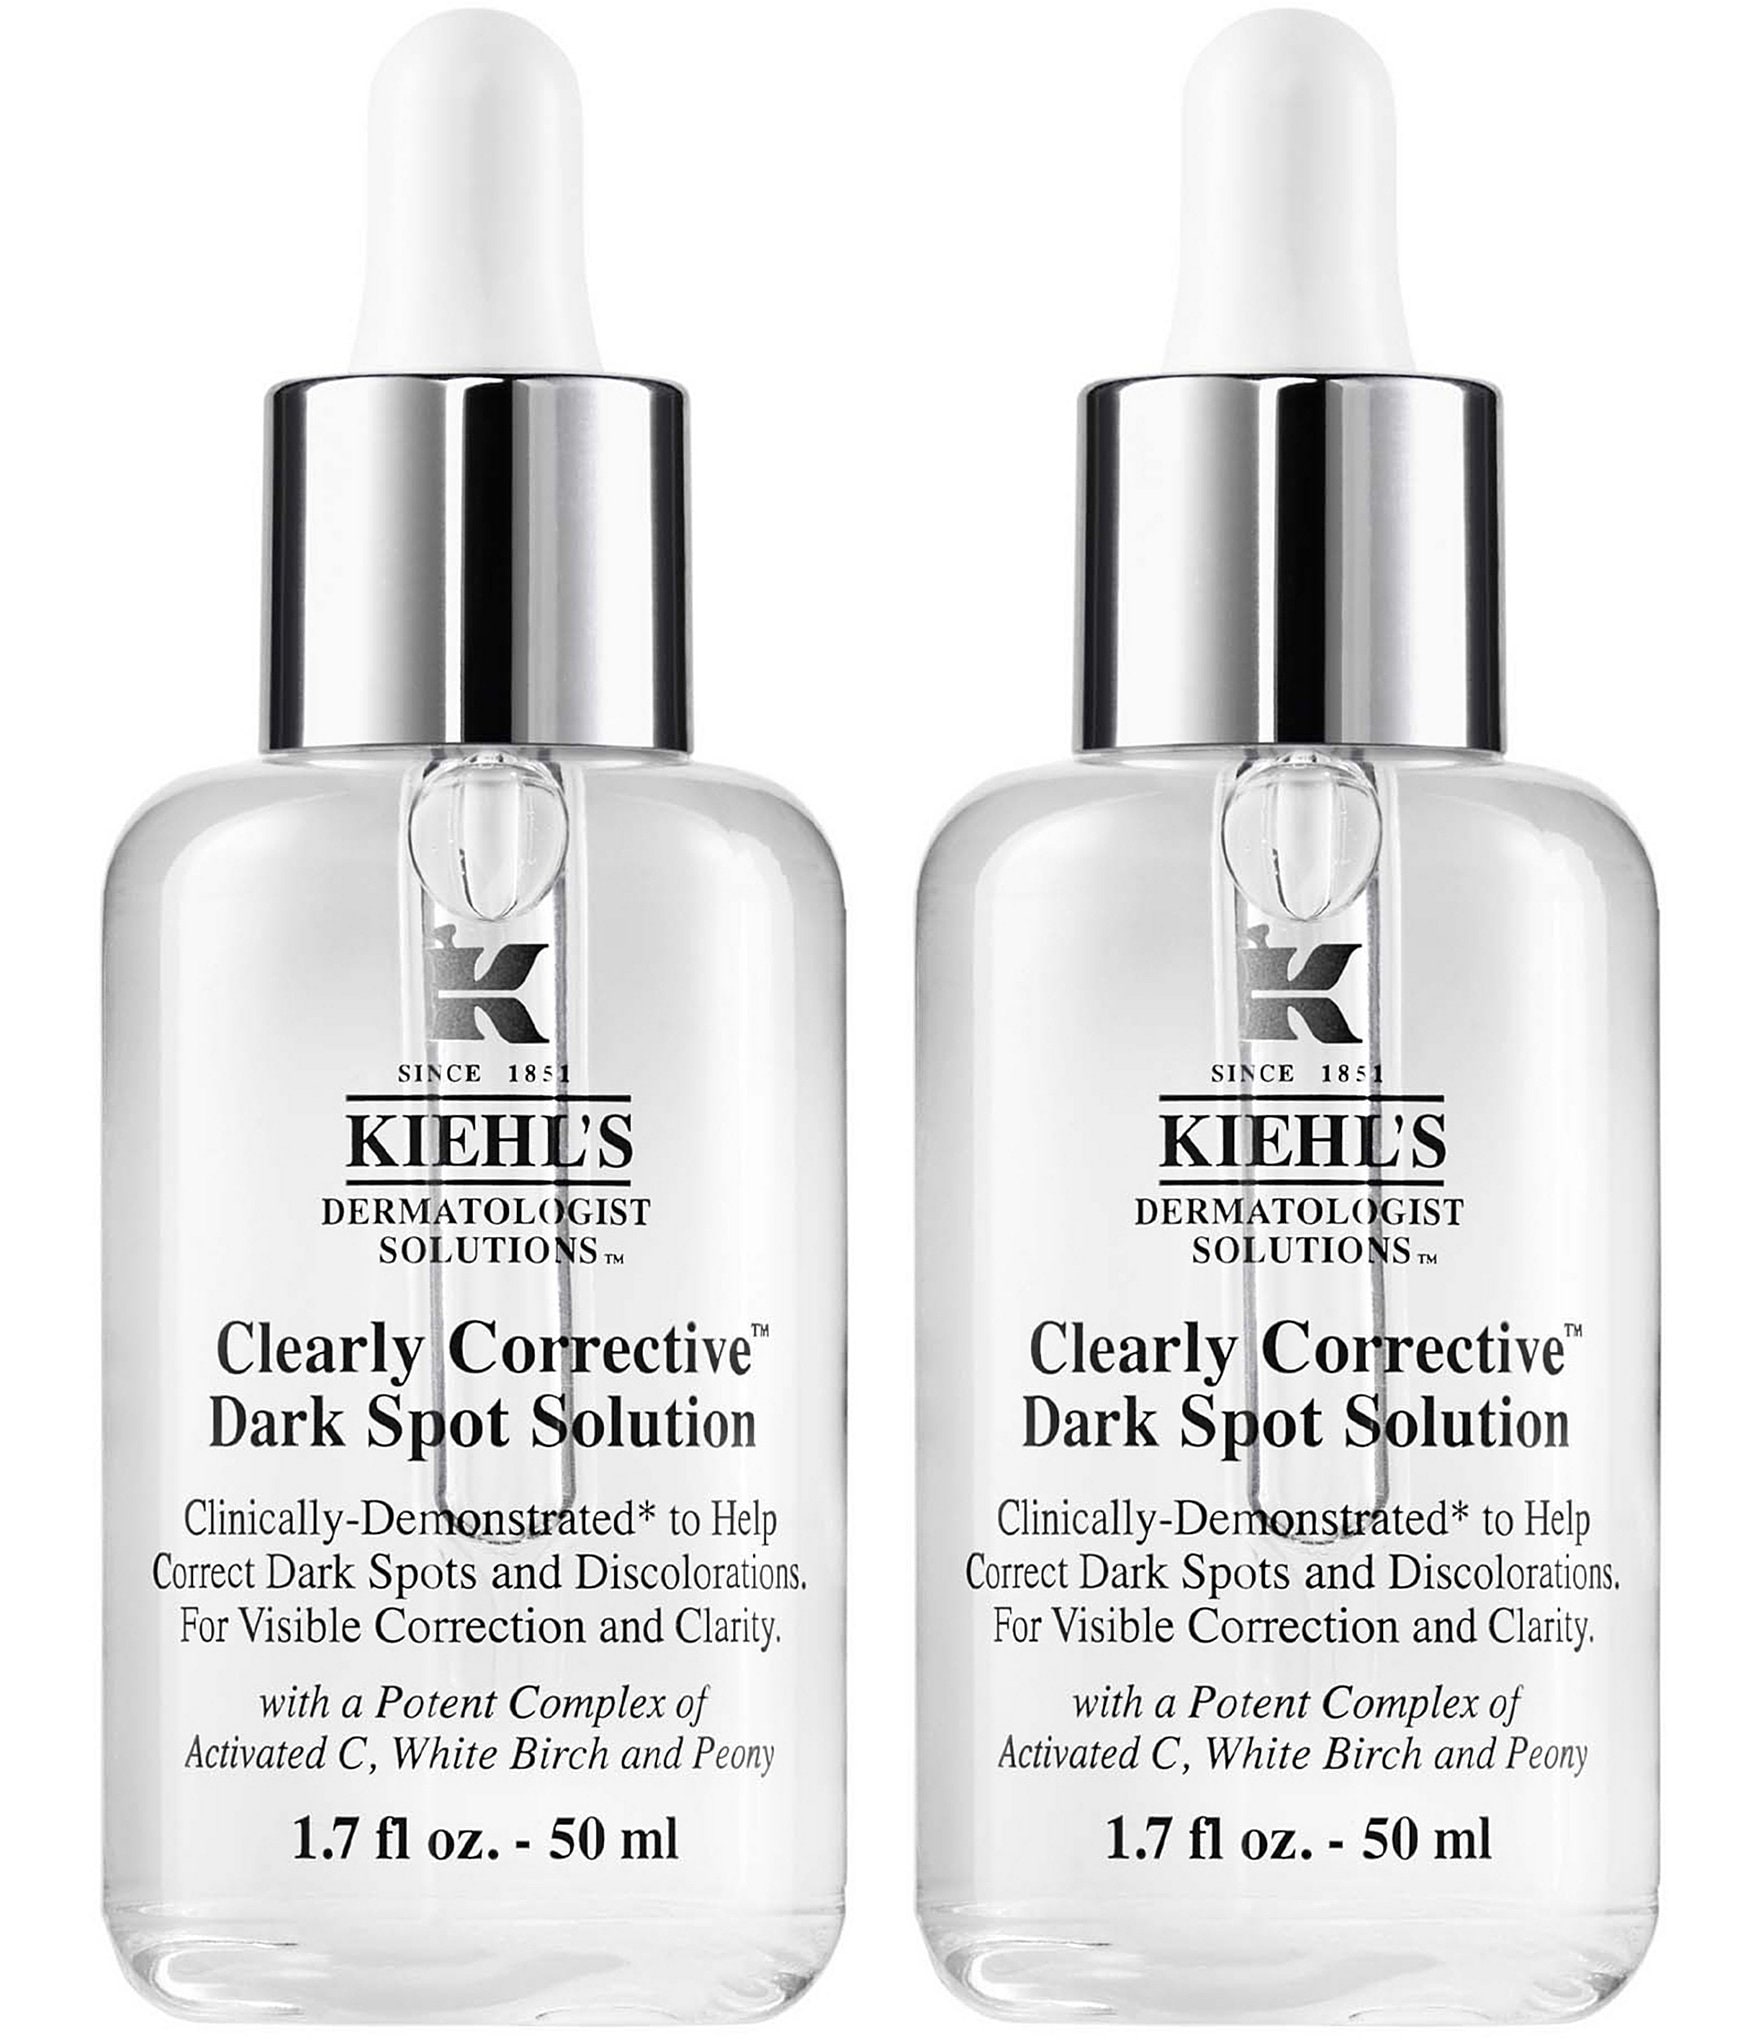 Kiehl's Clearly Corrective Dark Spot Solution Review - The Beauty Look Book